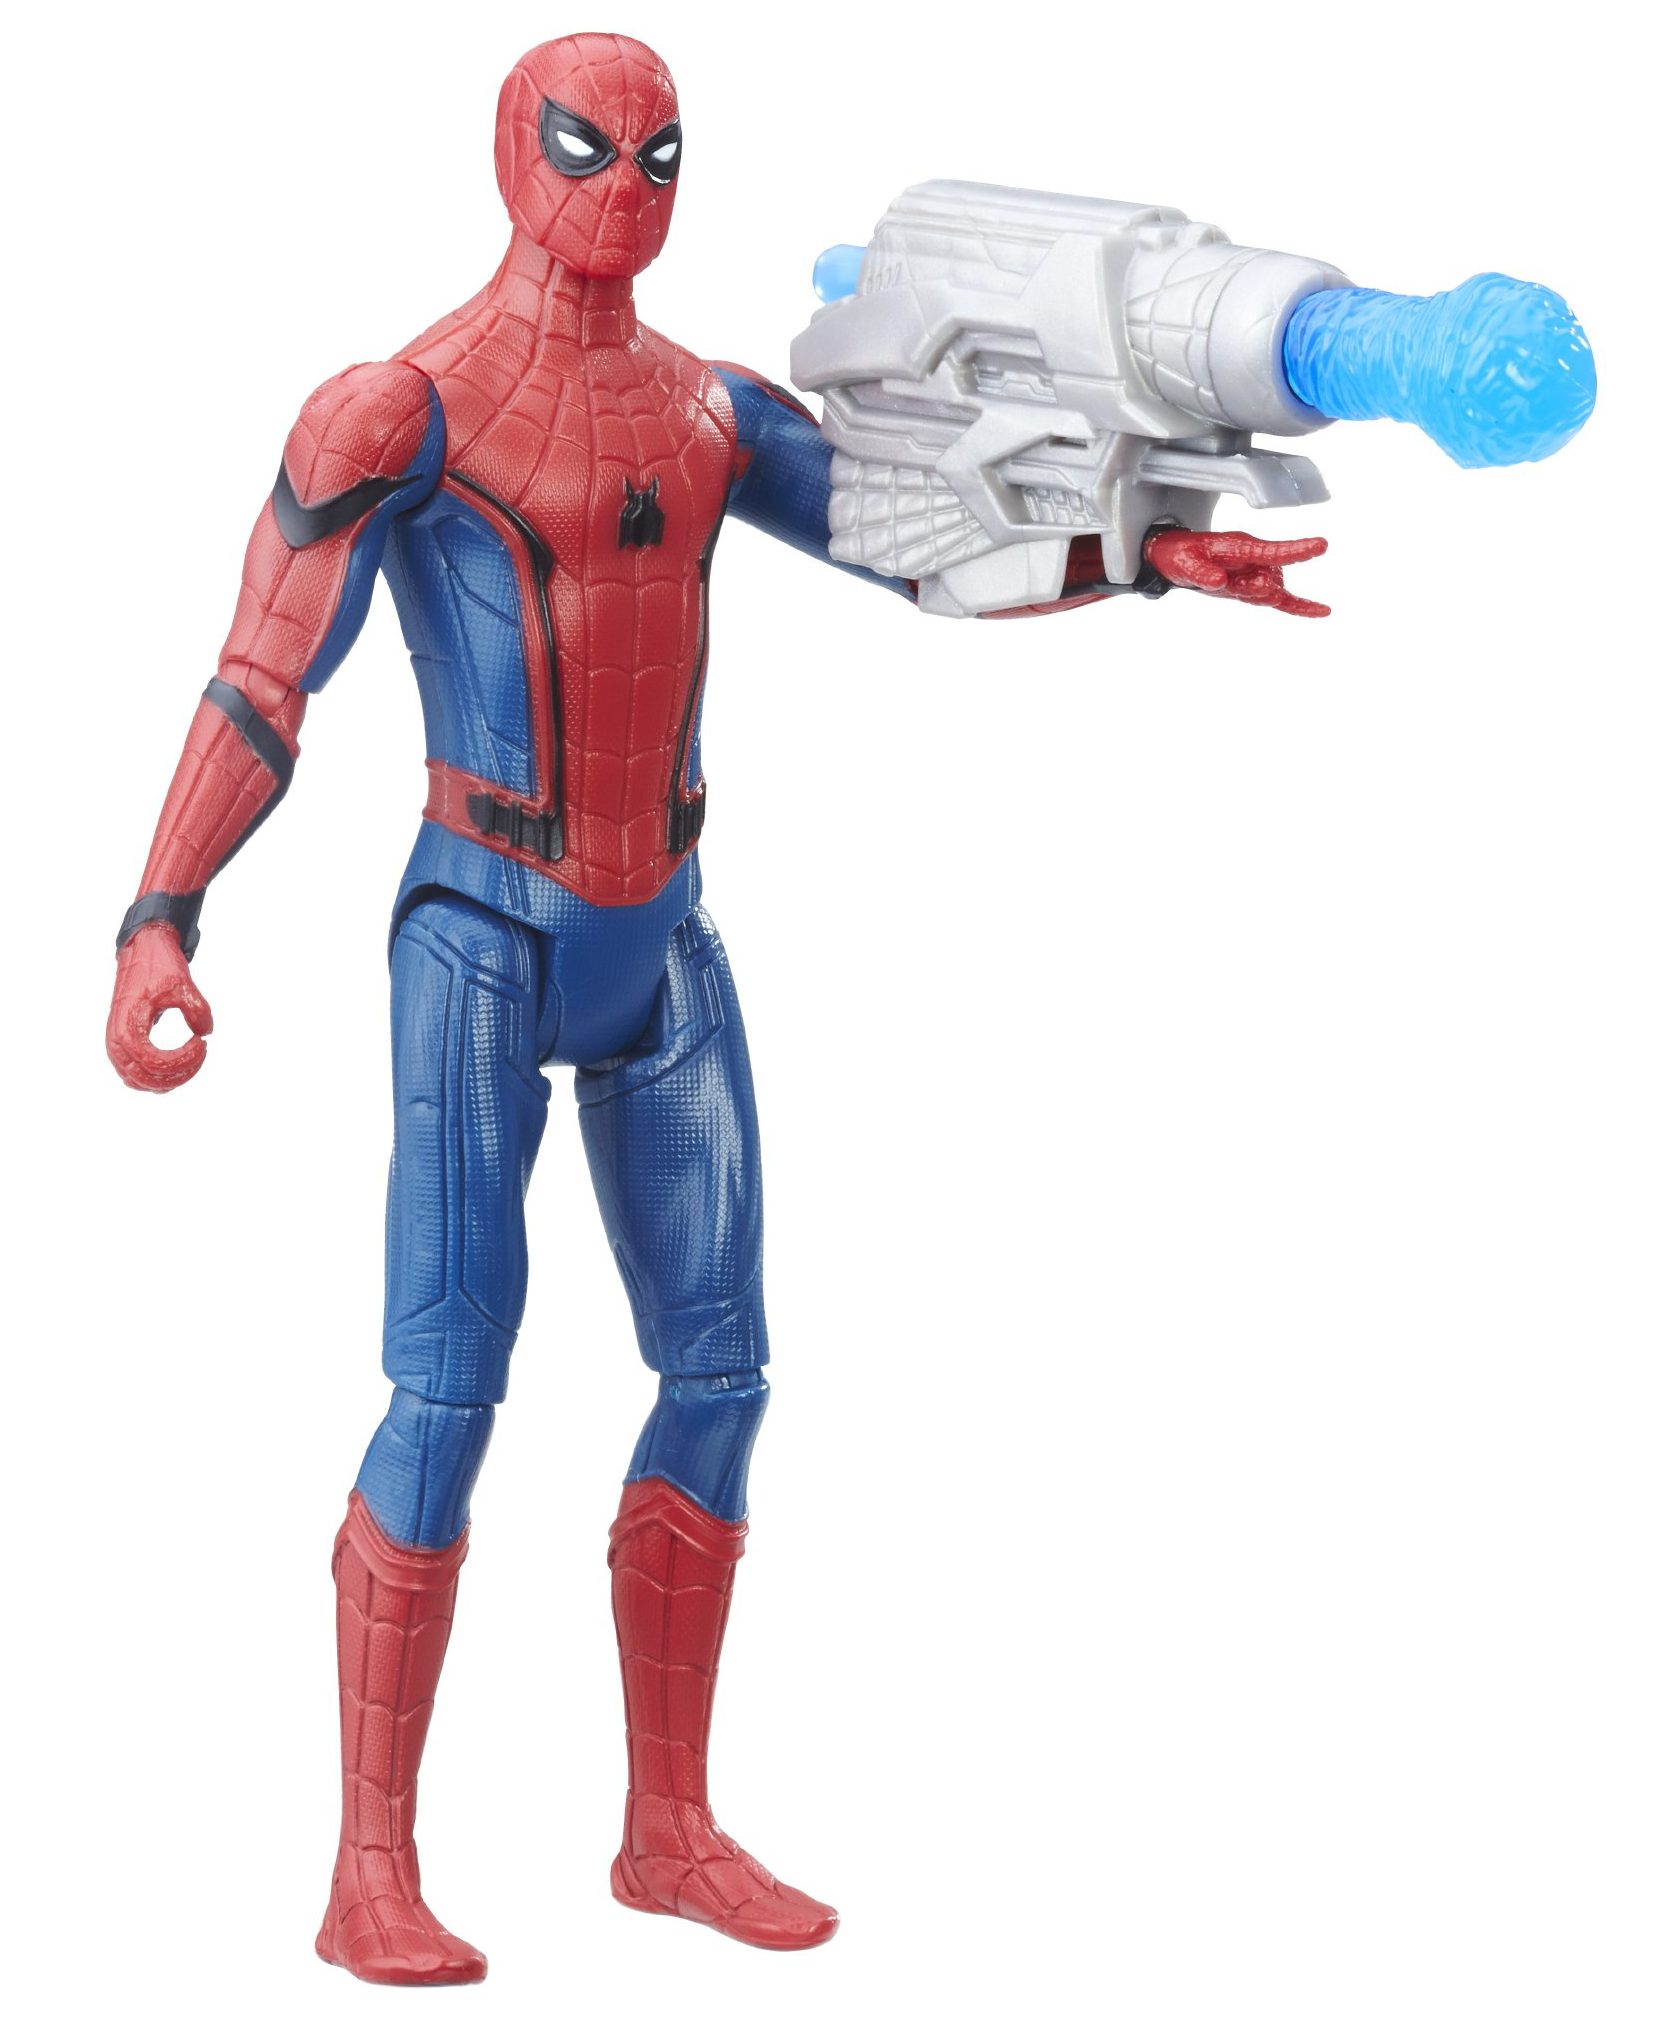 Hasbro Spider-Man Homecoming Figures & Playsets Revealed! - Marvel Toy News